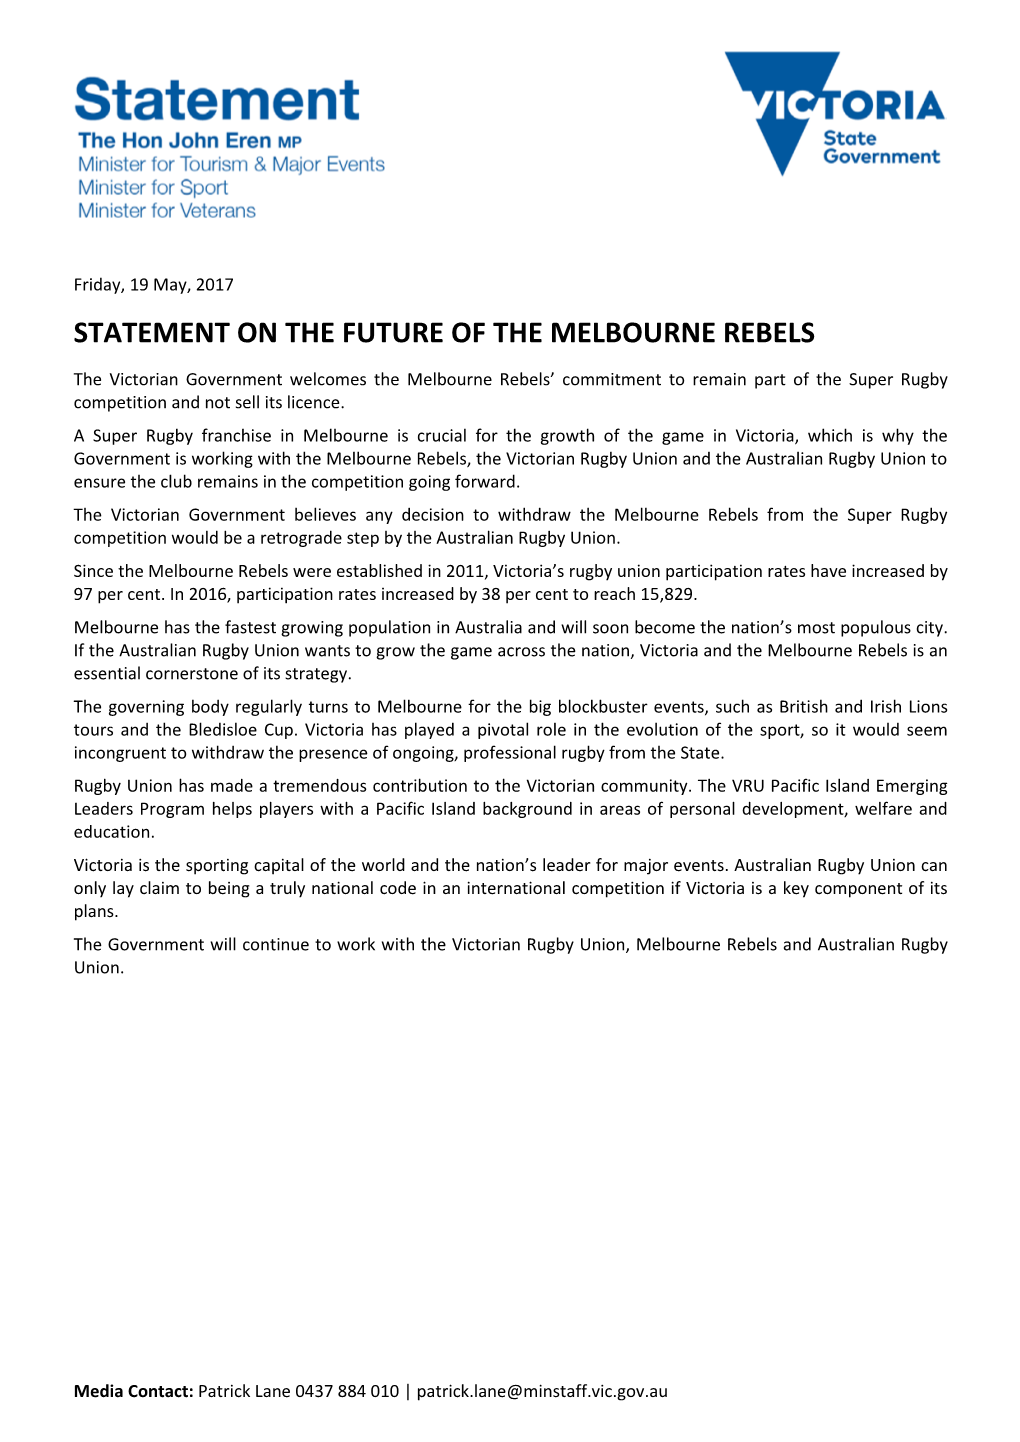 Statement on the Future of the Melbourne Rebels